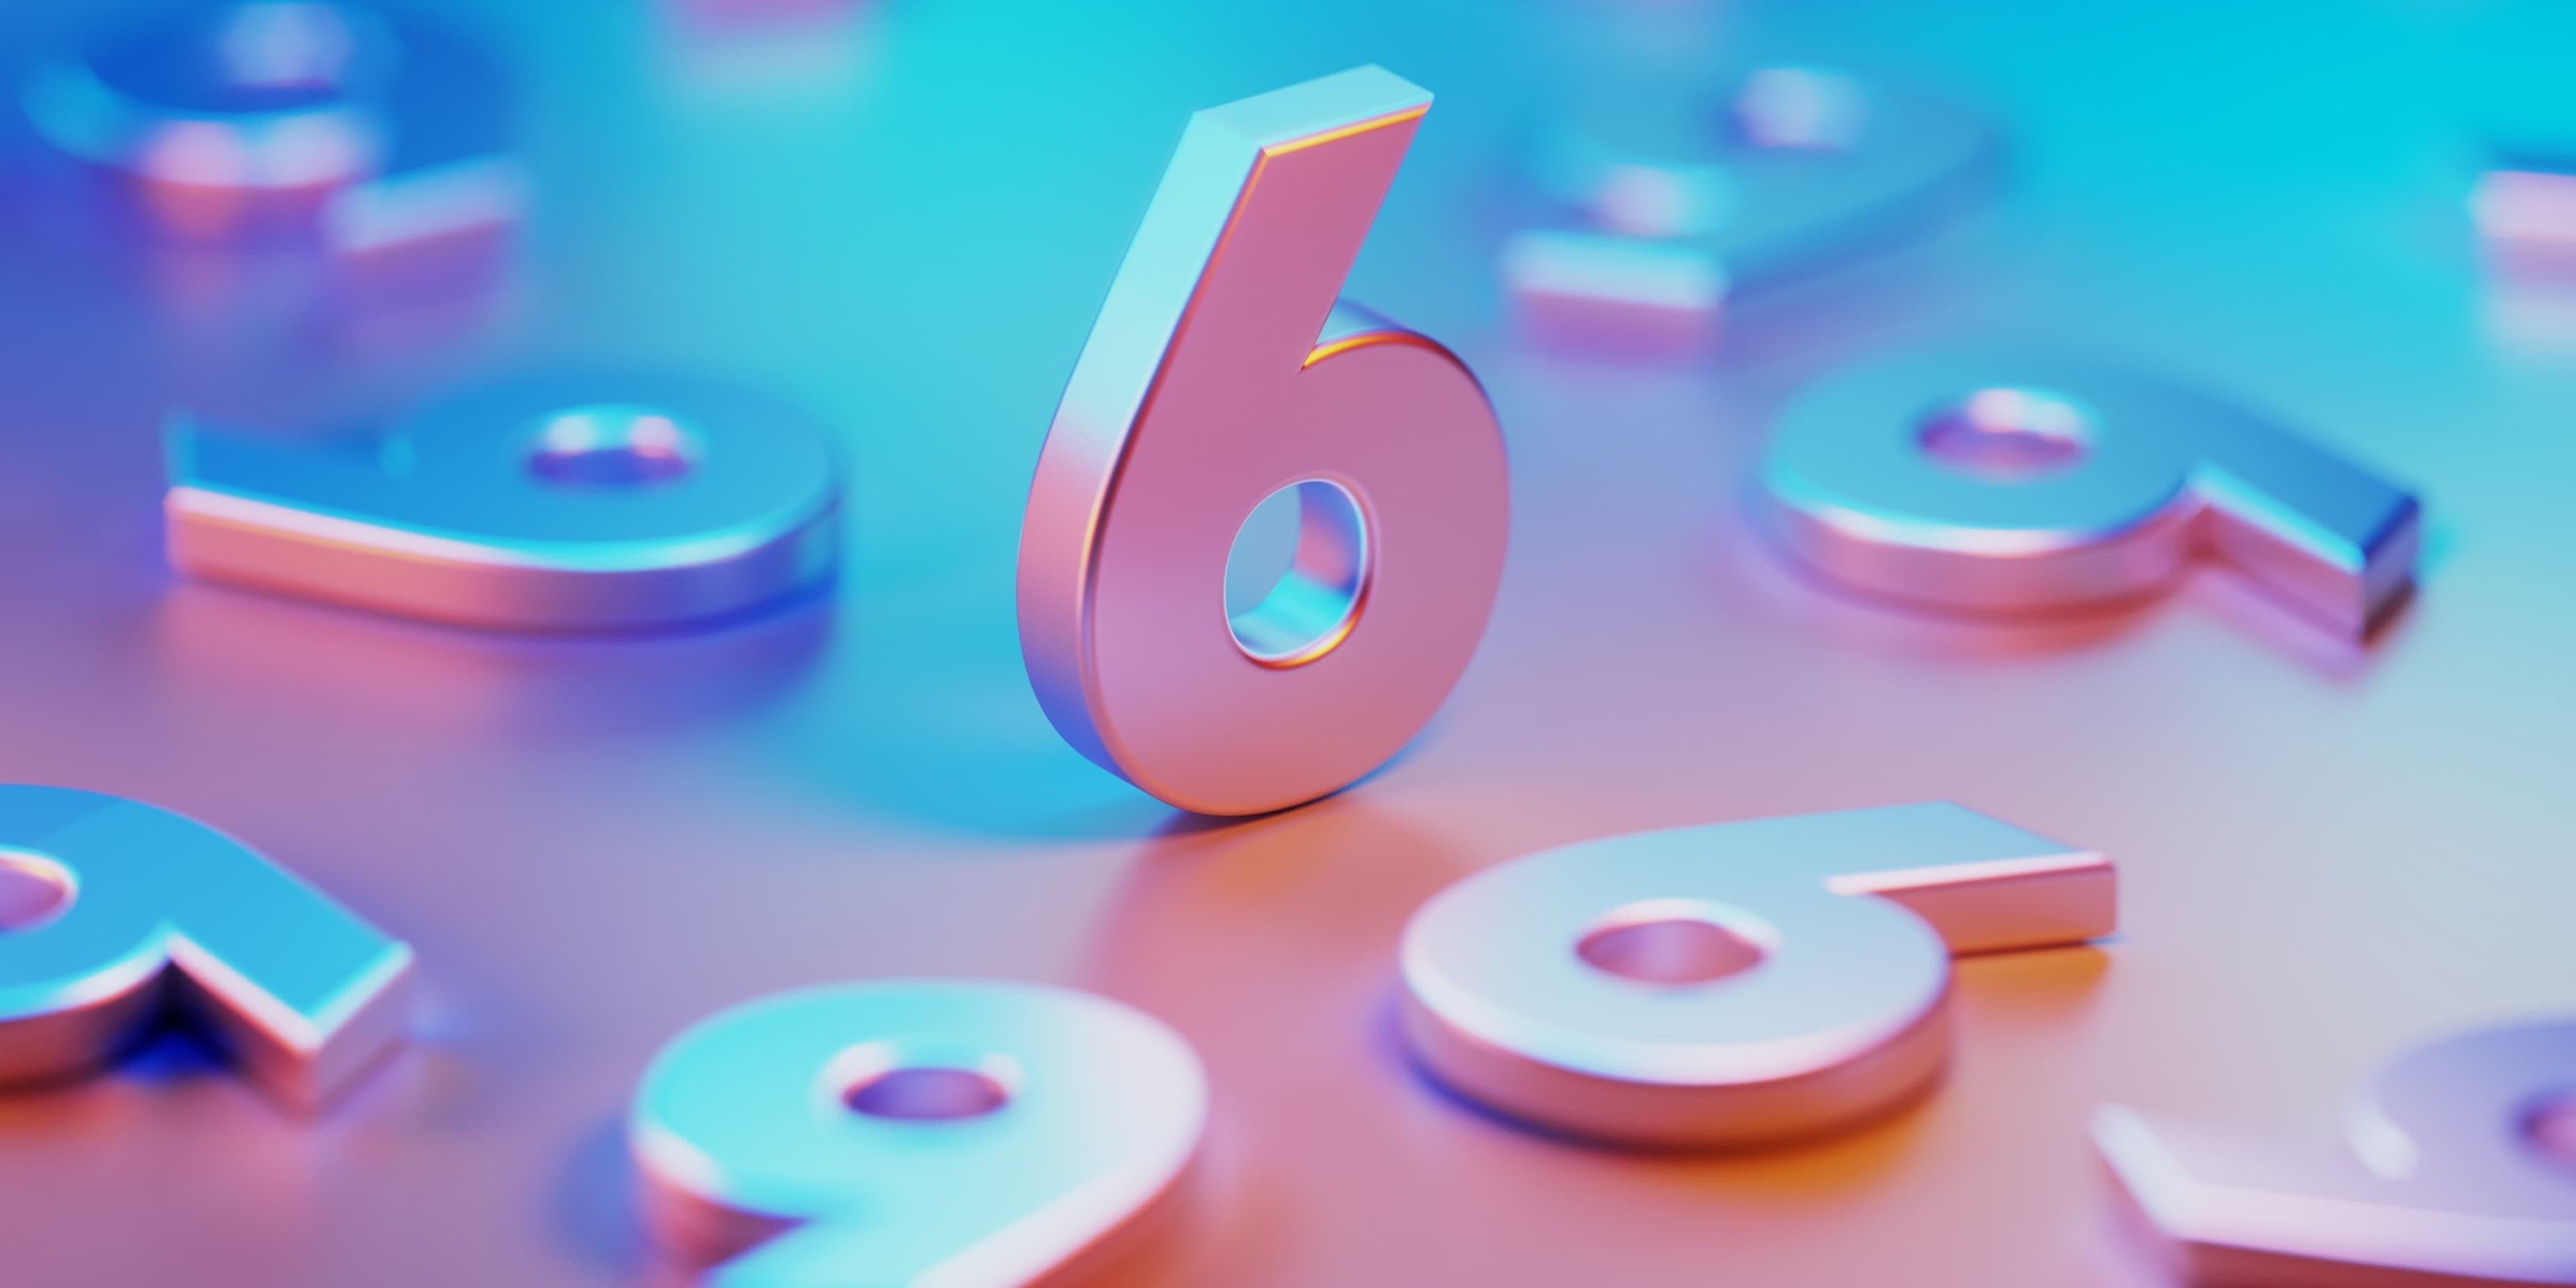 Several versions of the number six representing the six benefits of using document management